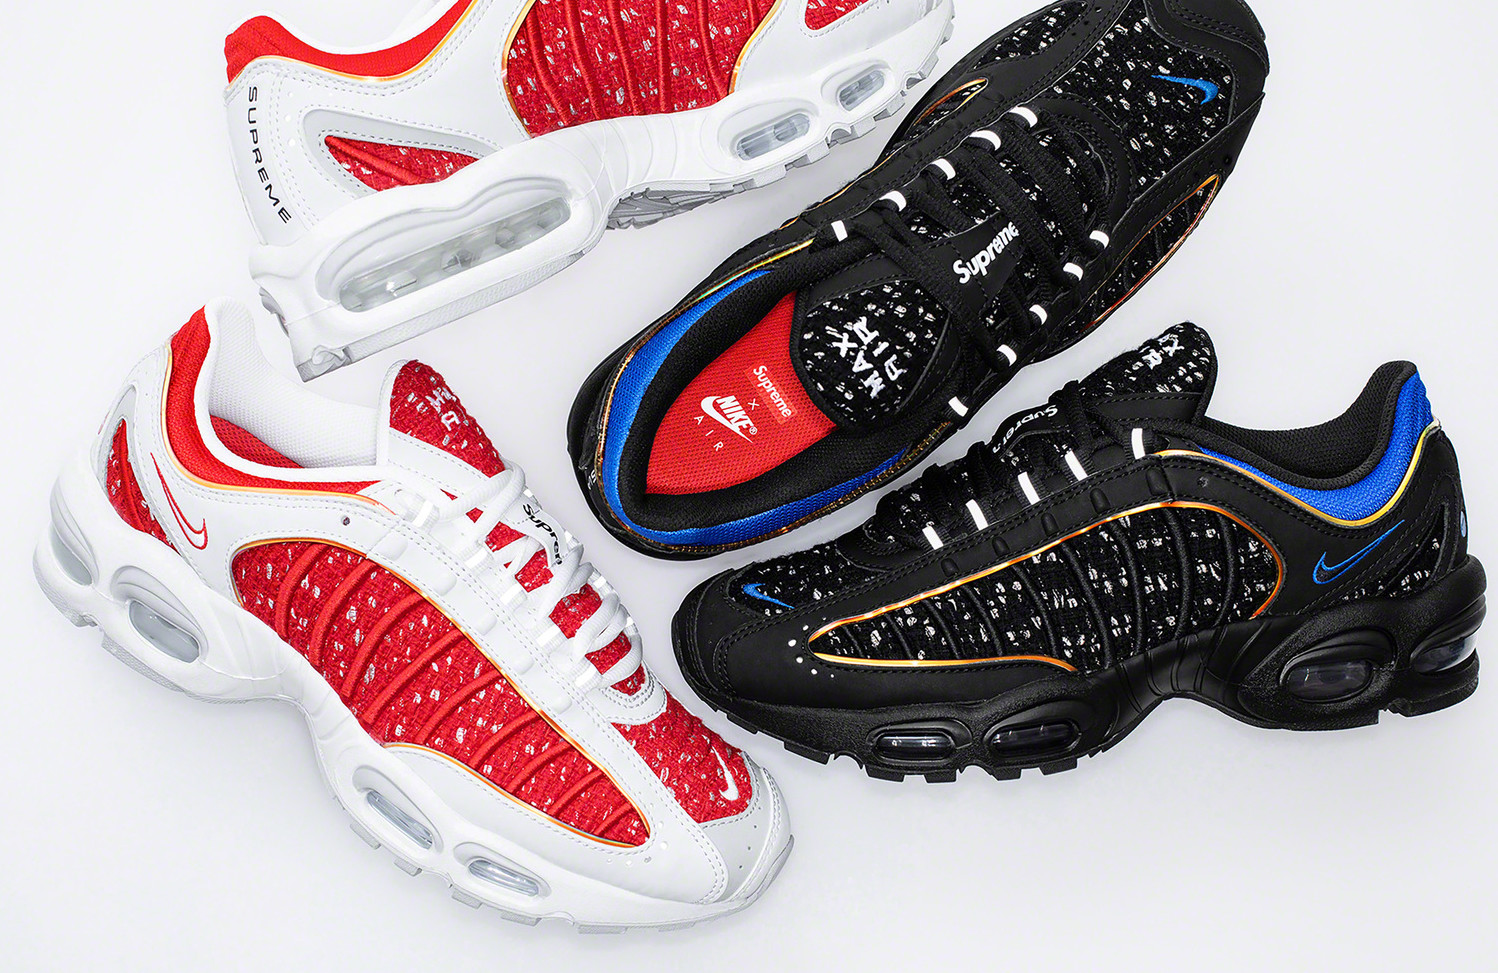 Supreme x Nike Air Tailwind 4 Collection